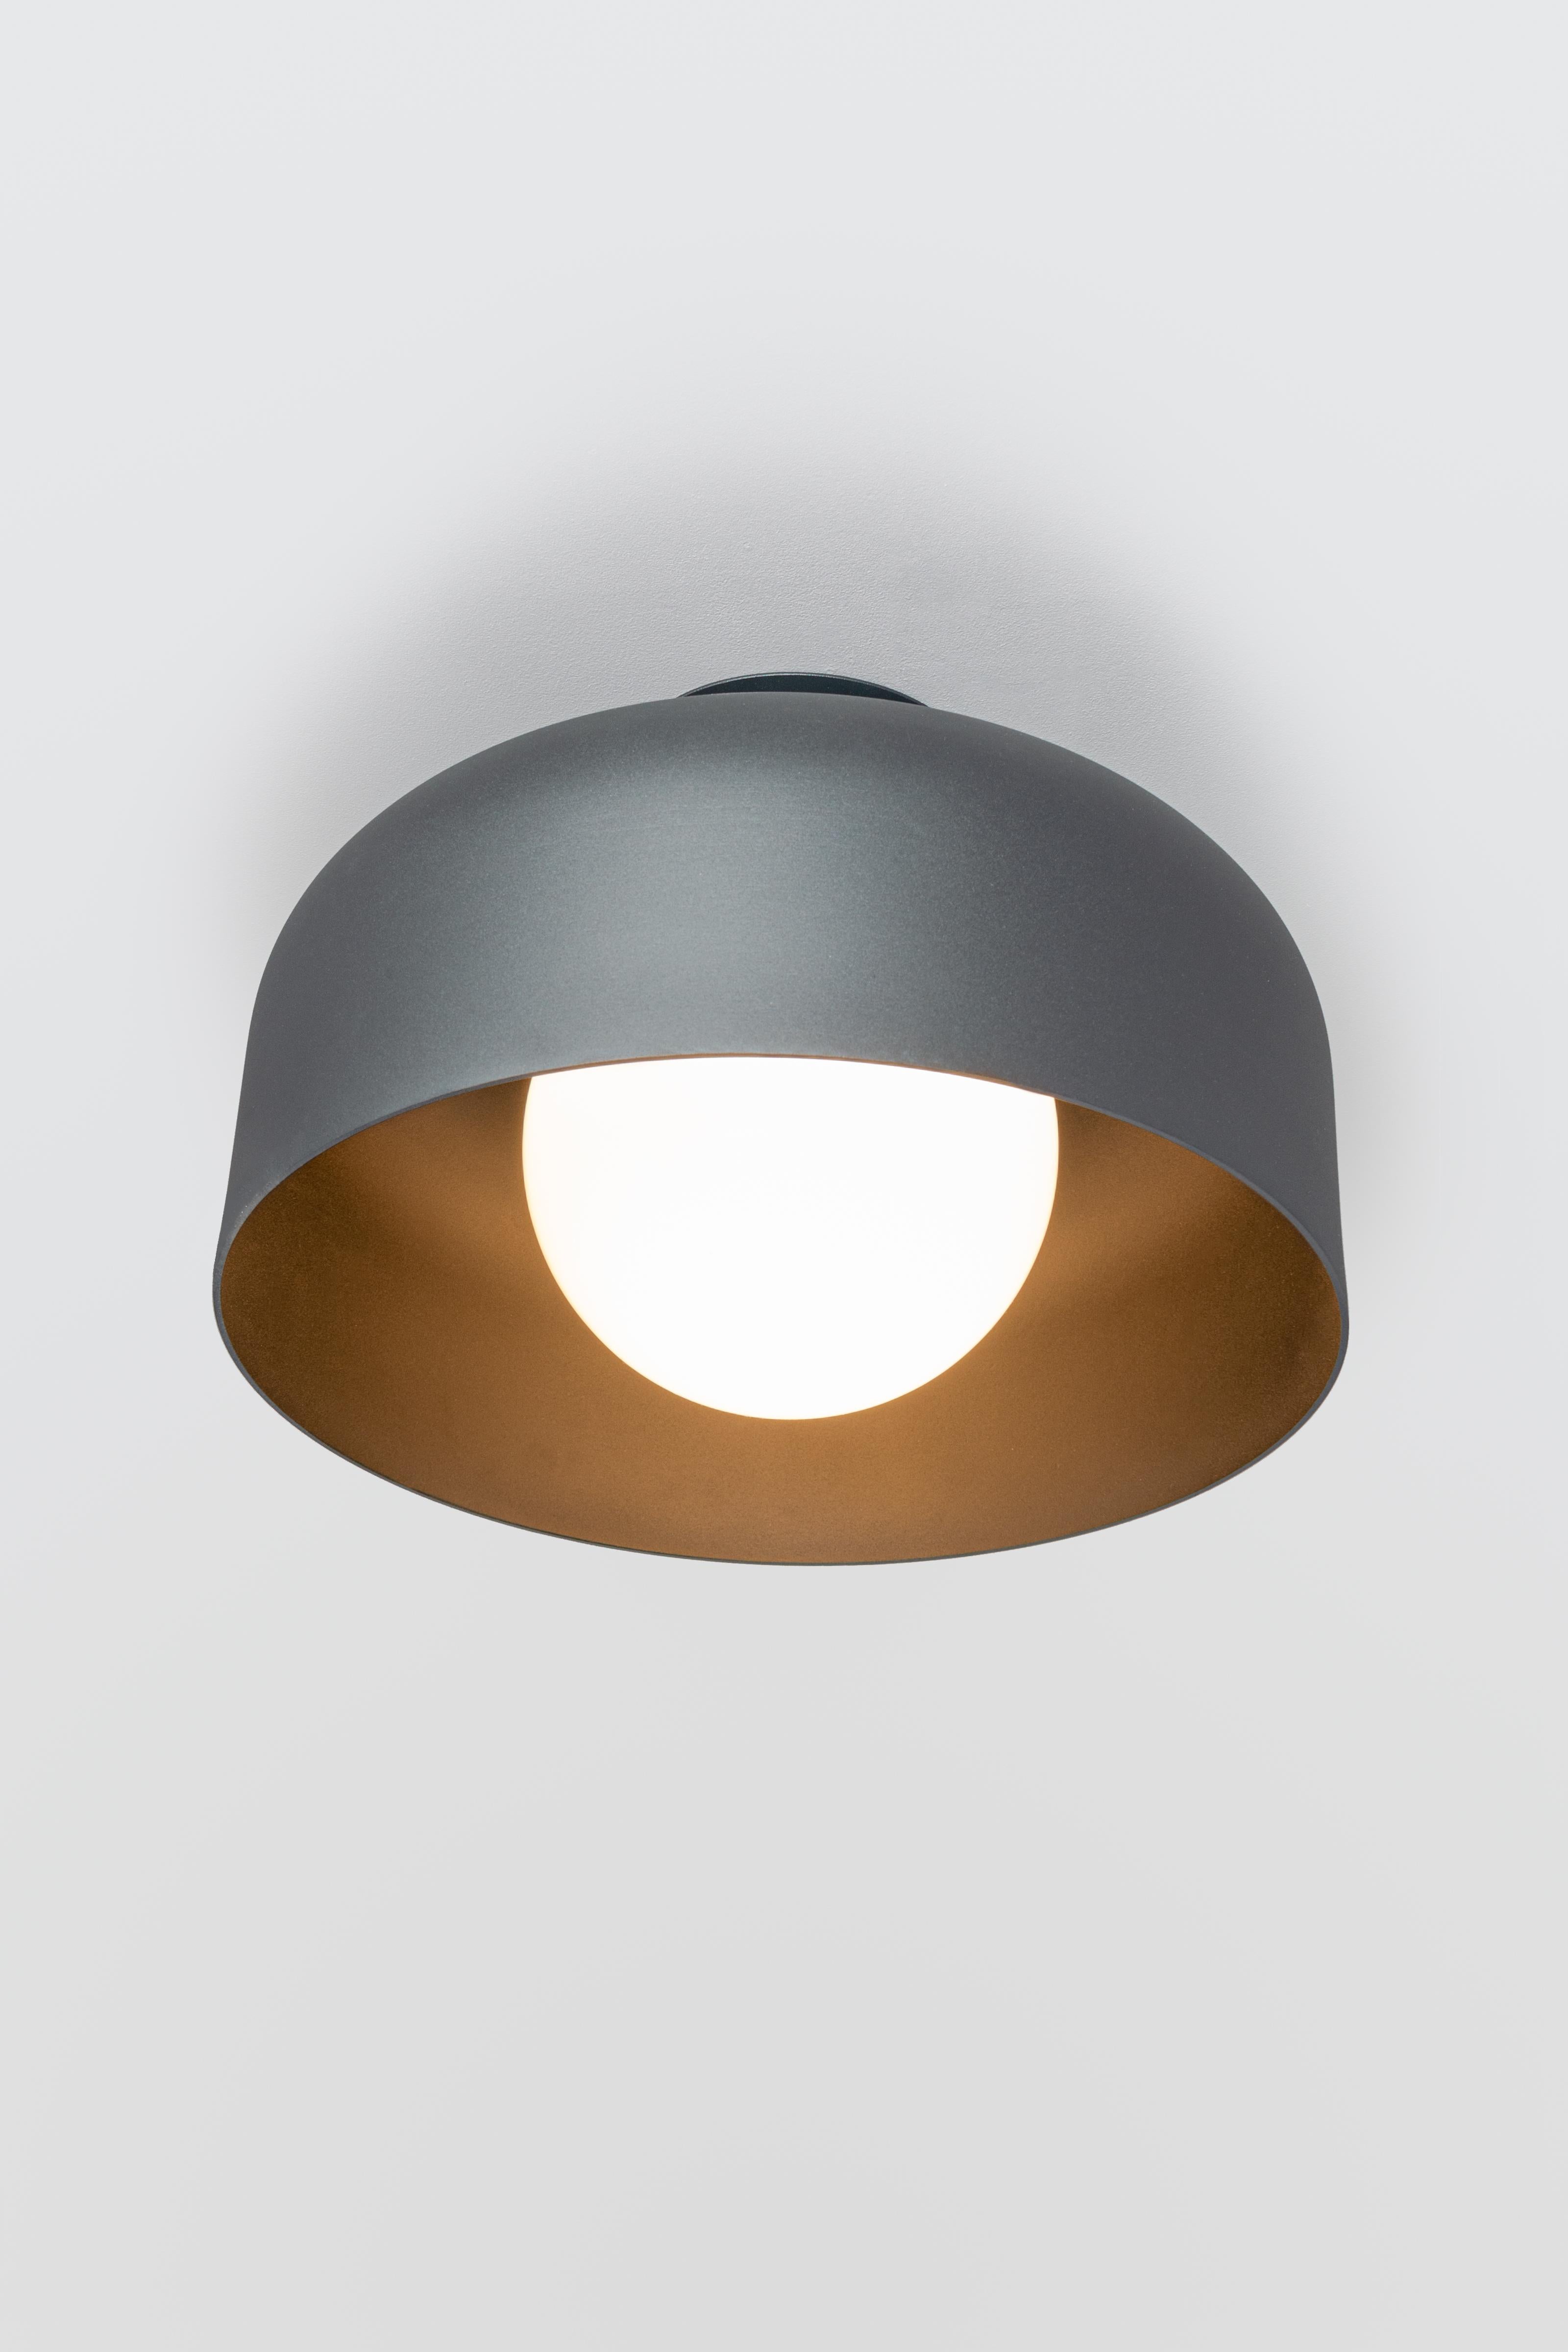 Spotlight Volumes, Ceiling / Wall Lamp B (vanilla) In New Condition For Sale In Paris, FR